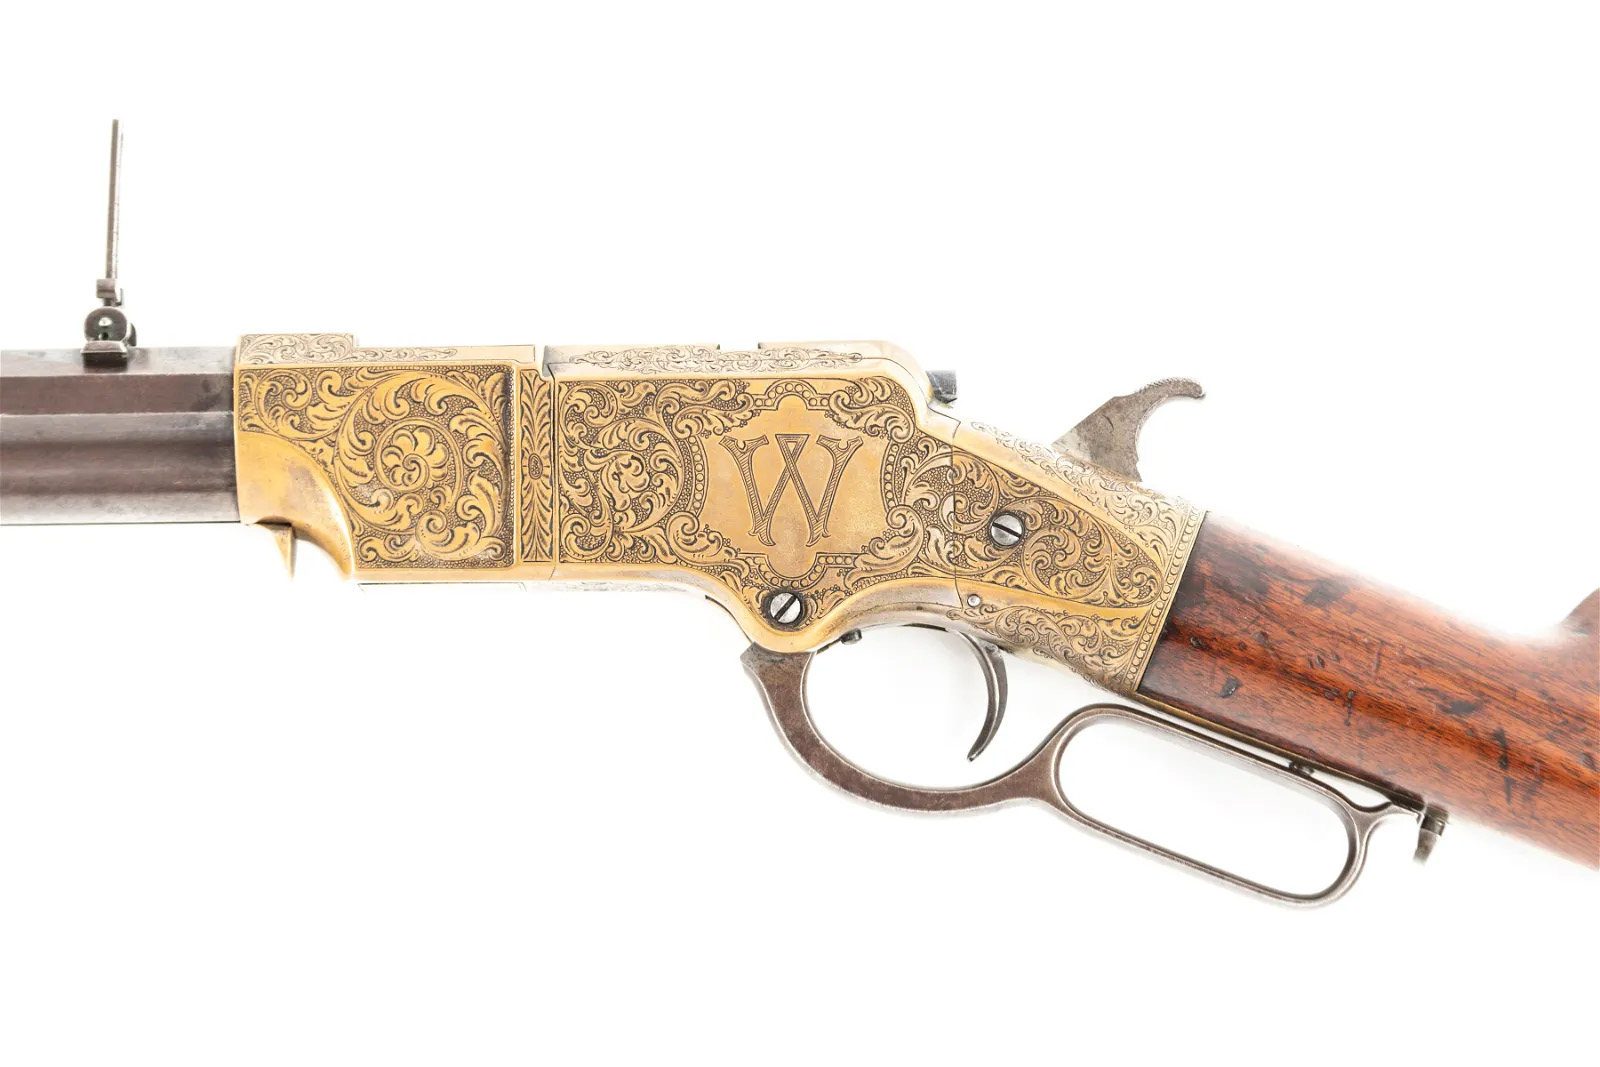 1862 Henry .44 caliber rifle, which sold for $135,000 ($155,250 with buyer's premium) at A&S Antique Auction.